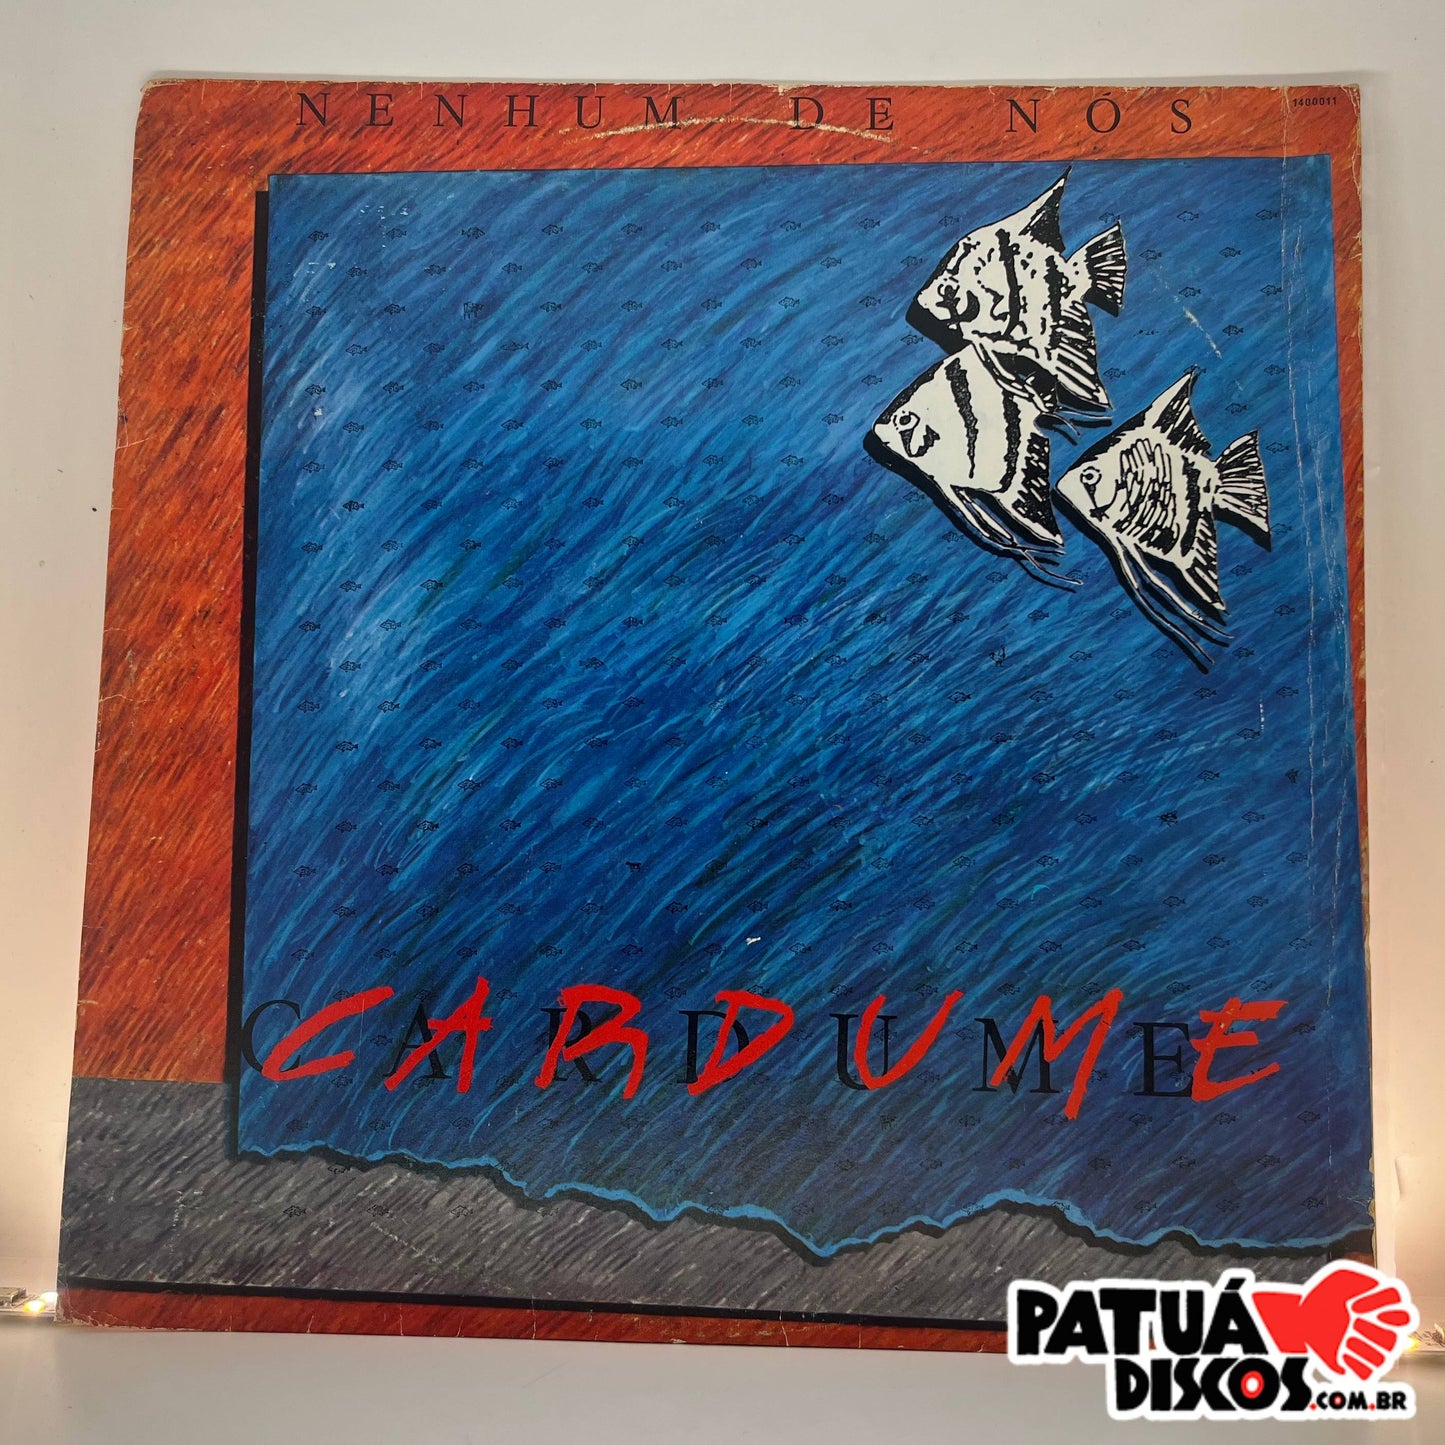 None Of Us - Cardume - LP